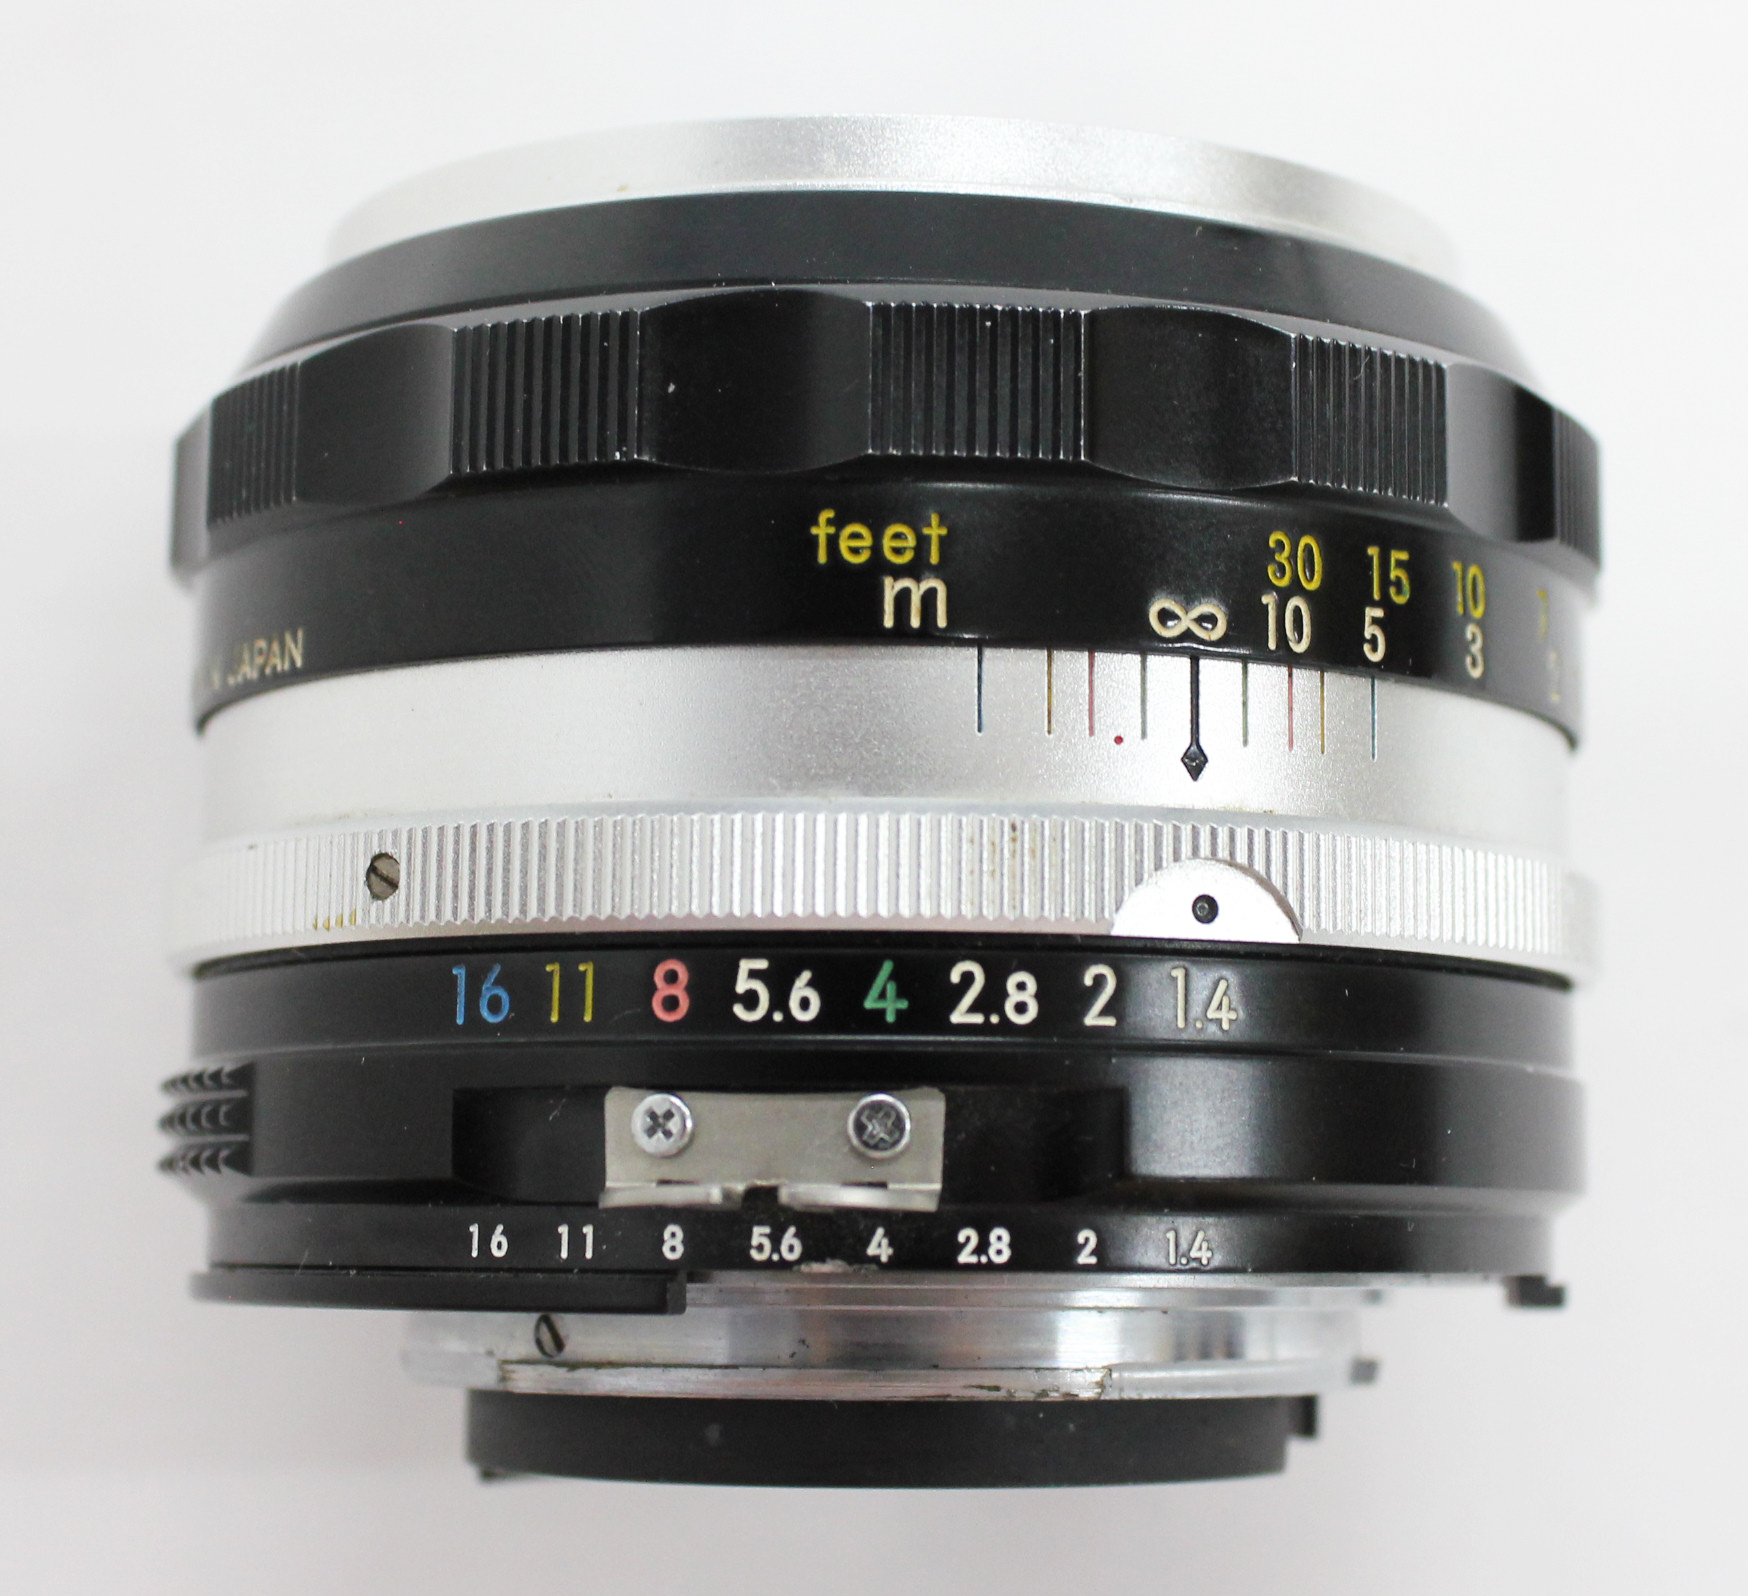 Nikon F Photomic FTN with Nikkor-S 50mm F/1.4 Ai Converted Lens 